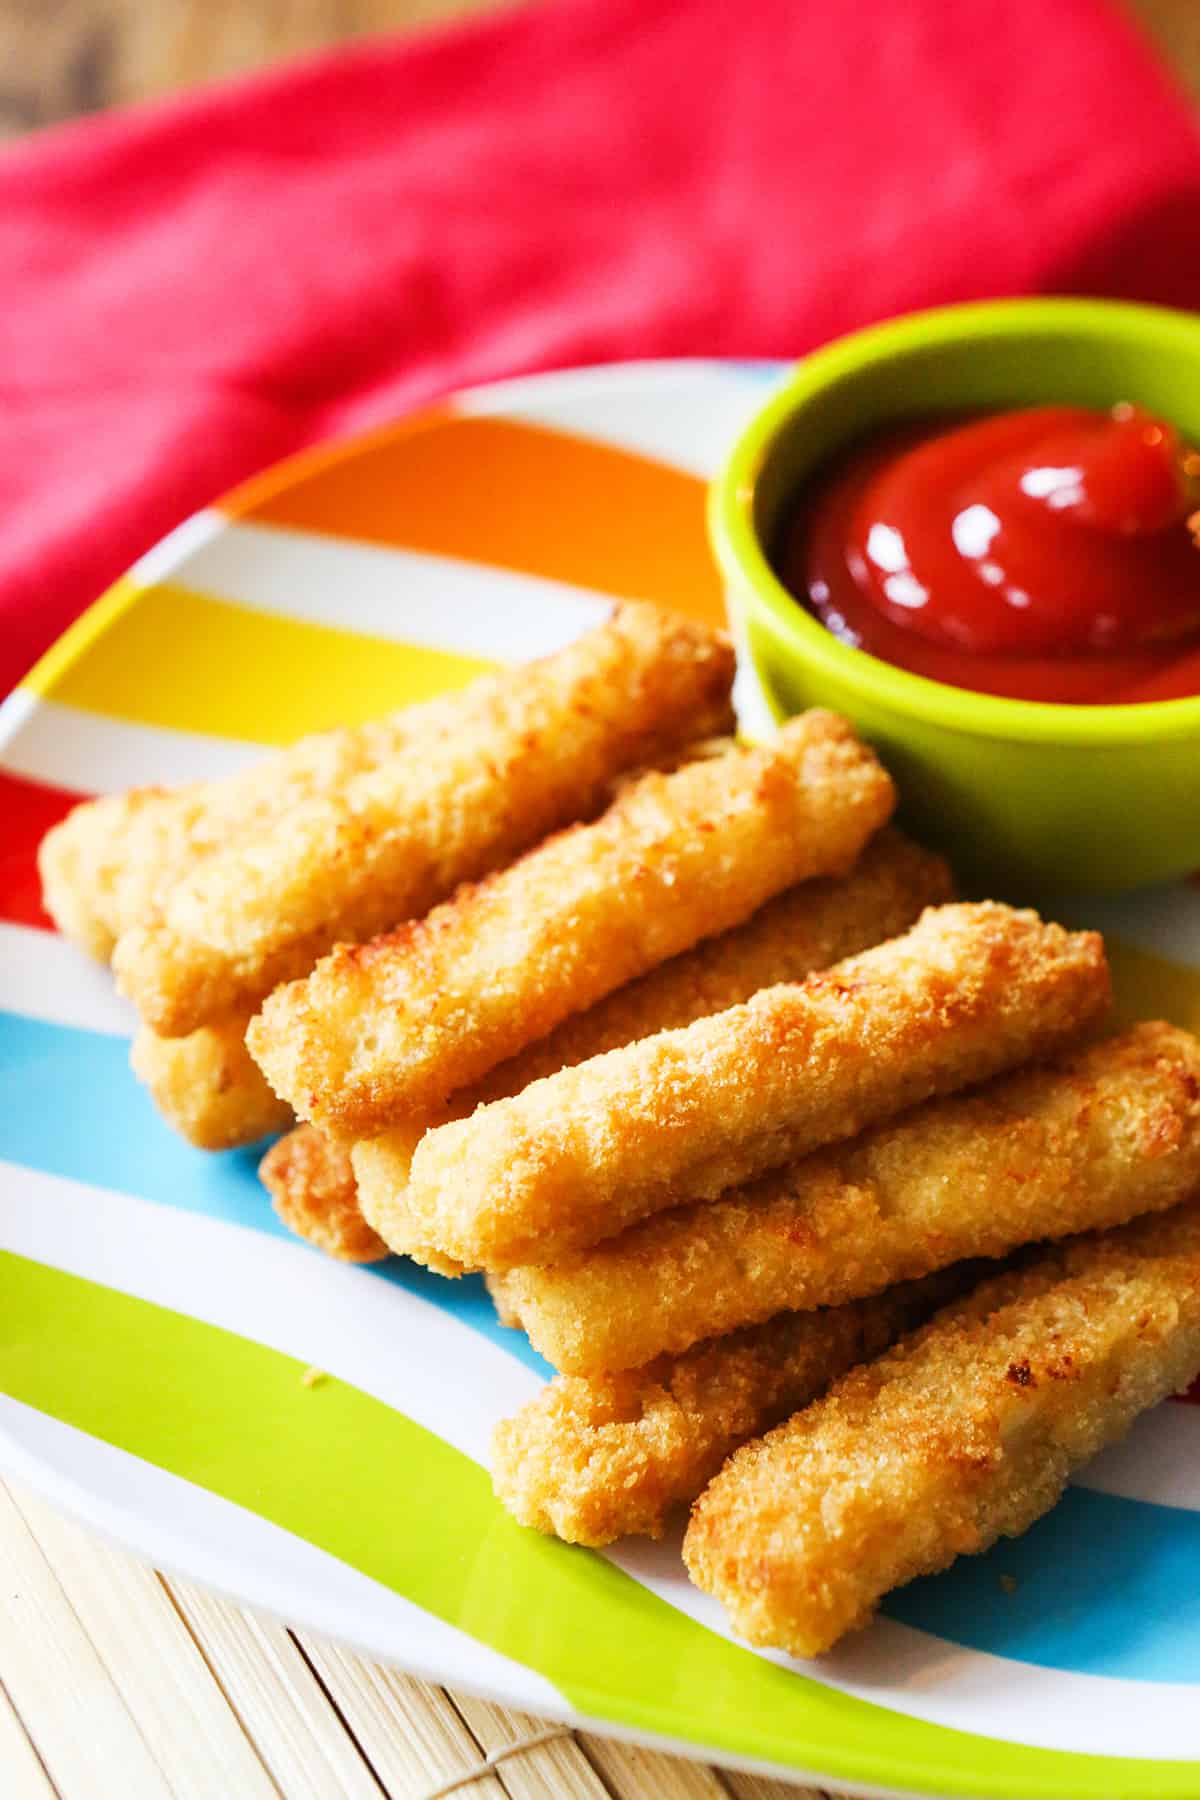 Plate full of stacked fish sticks sitting next to ketchup for dipping.